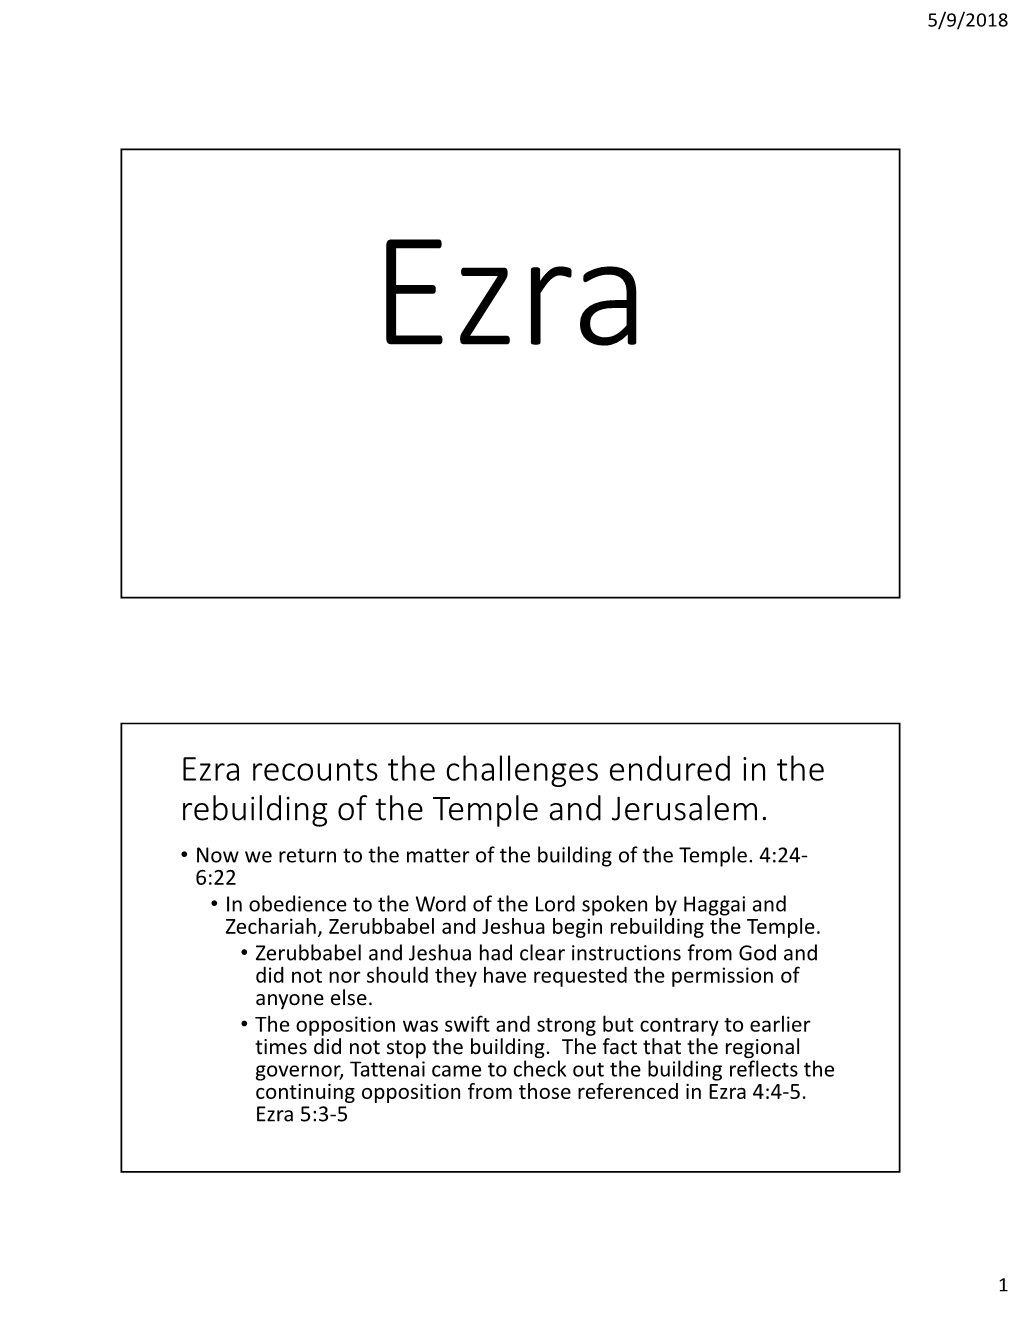 Ezra Recounts the Challenges Endured in the Rebuilding of the Temple and Jerusalem